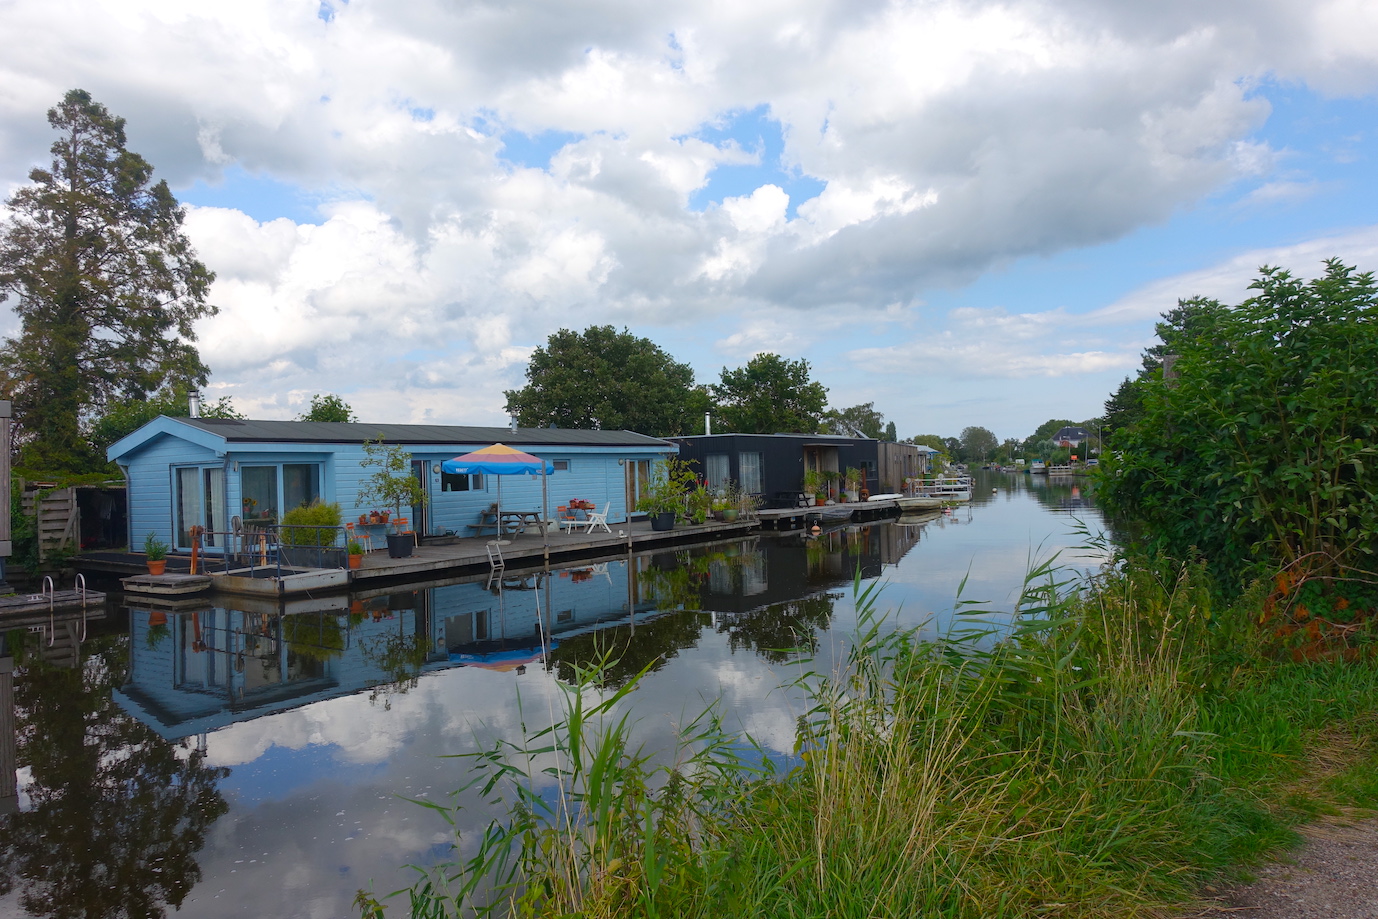 House boats on a canal in Broek in Waterland on the way from Amsterdam